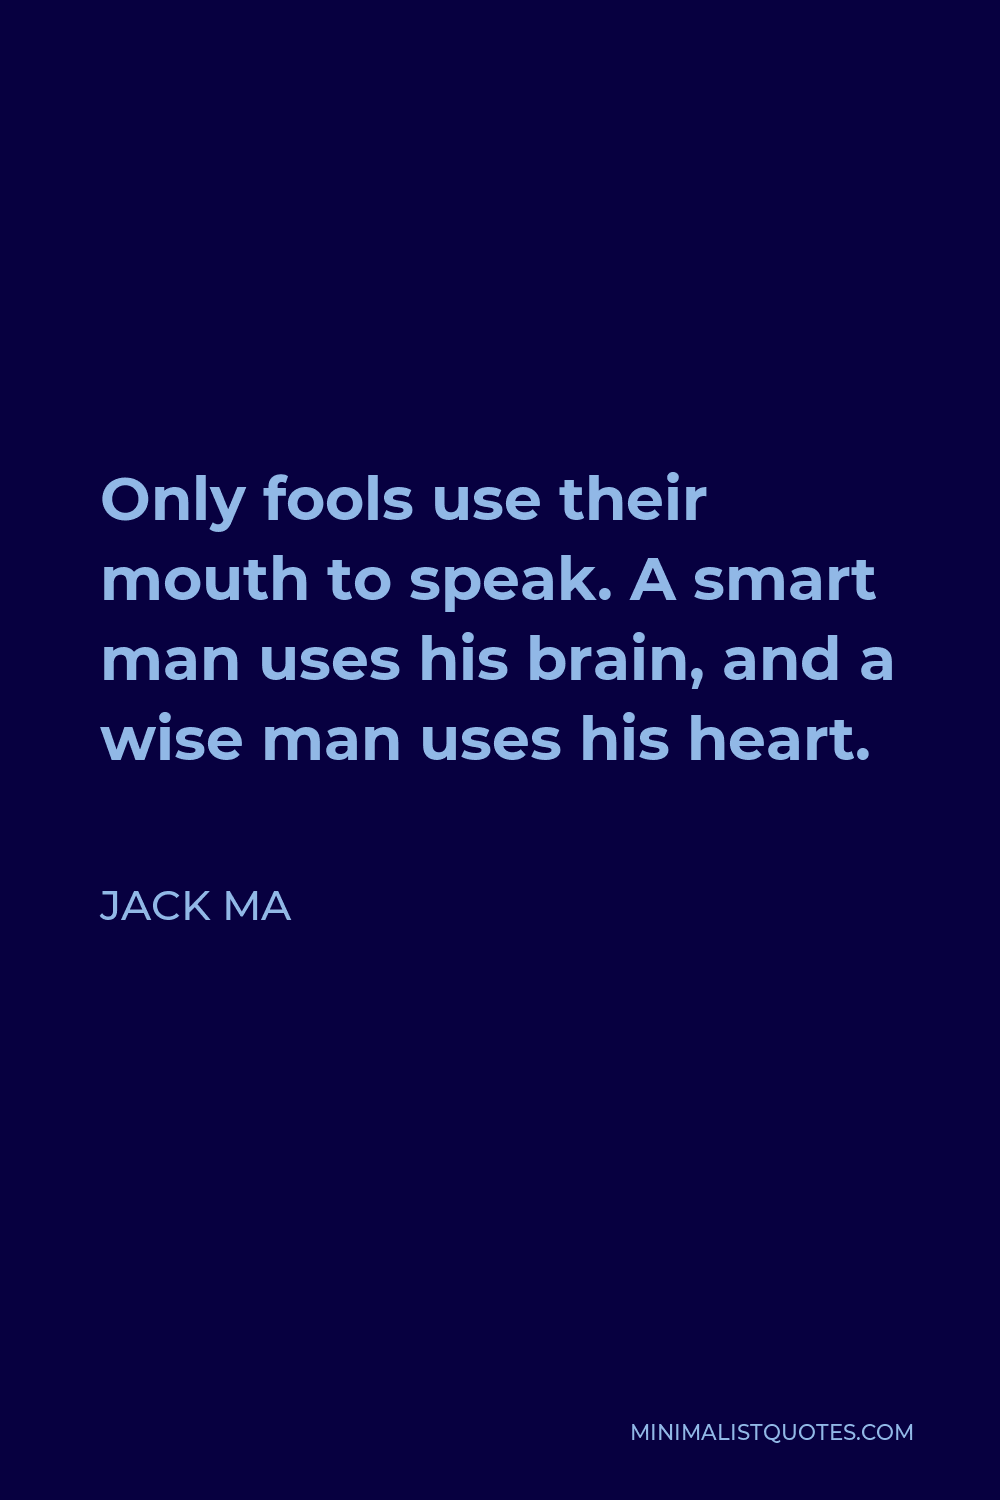 Jack Ma Quote - Only fools use their mouth to speak. A smart man uses his brain, and a wise man uses his heart.